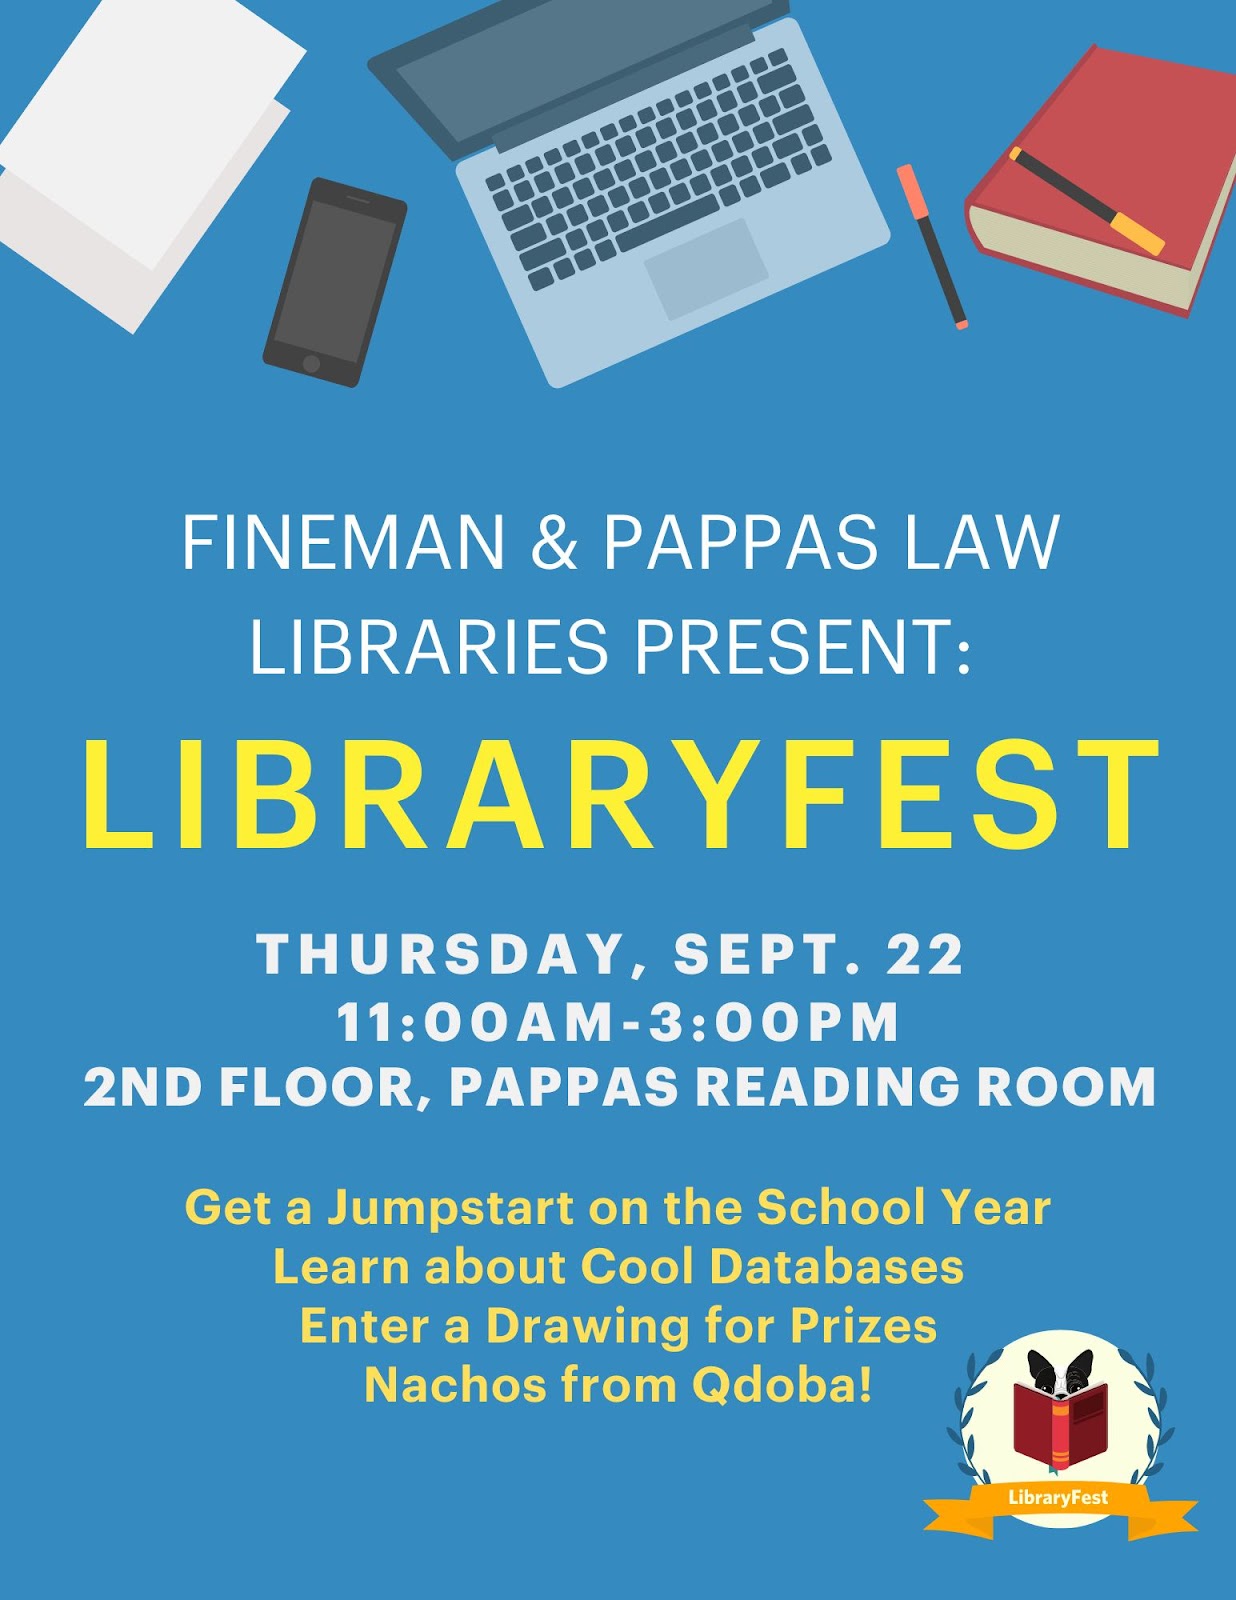 A flyer with light blue background and a white seal in the corner picturing a Boston Terrier reading a red book with a gold banner underneath that says LibraryFest. The words on the flyer say LibraryFest Thursday, September 22 11:00AM to 3:00PM, second floor, Pappas Reading Room. Get a jump start on the School Year. Learn about cool databases. Enter a drawing for prizes. Nachos from Qdoba!